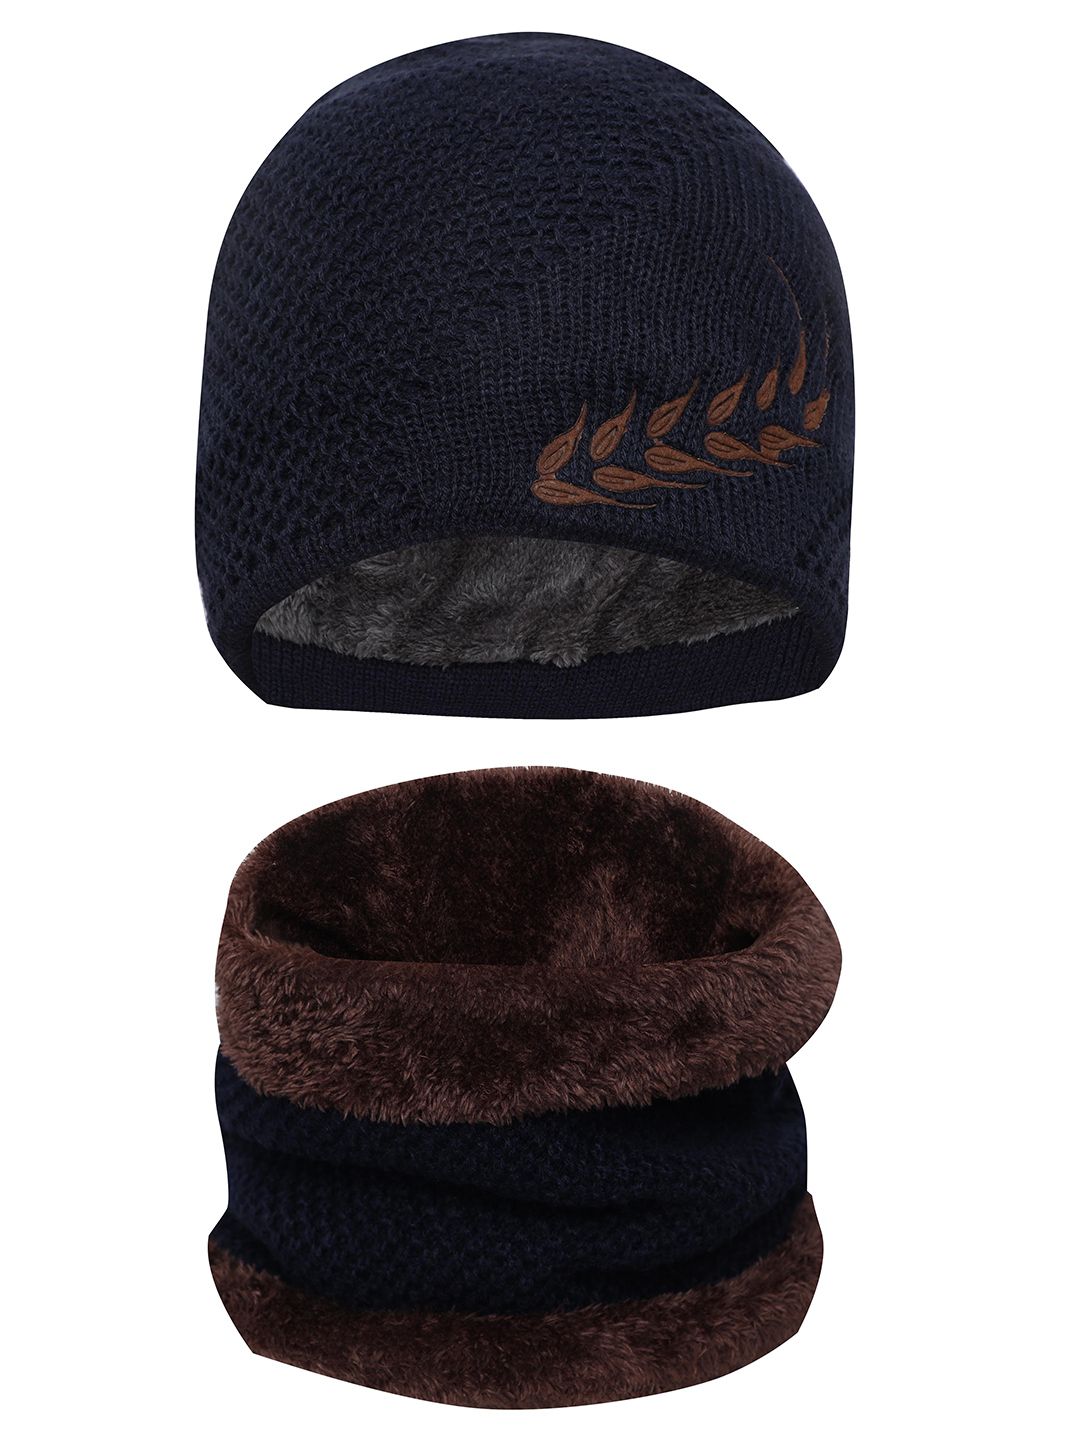 FabSeasons Unisex Navy Blue & Black Acrylic Beanie With Neck Warmer Price in India